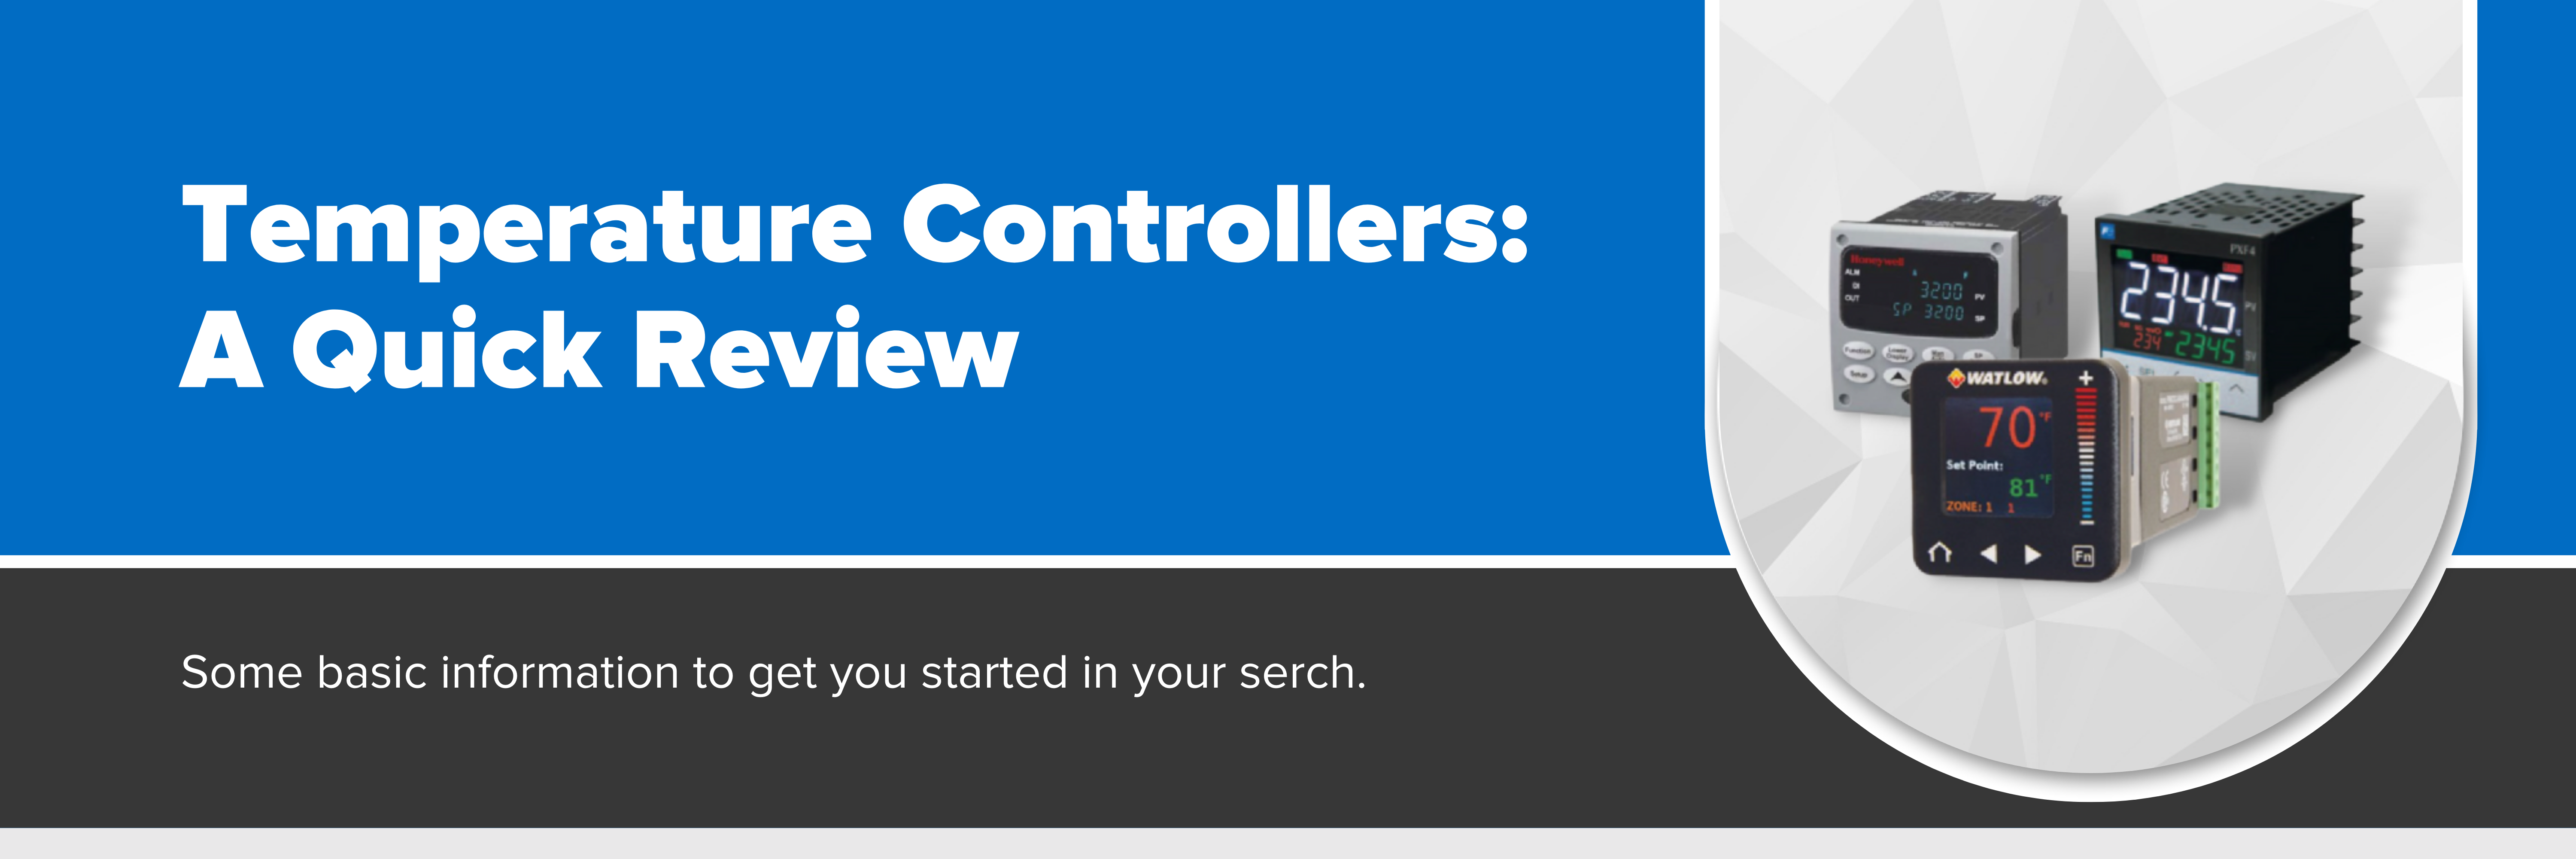 Header image with text "Temperature Controllers: A Quick Review"